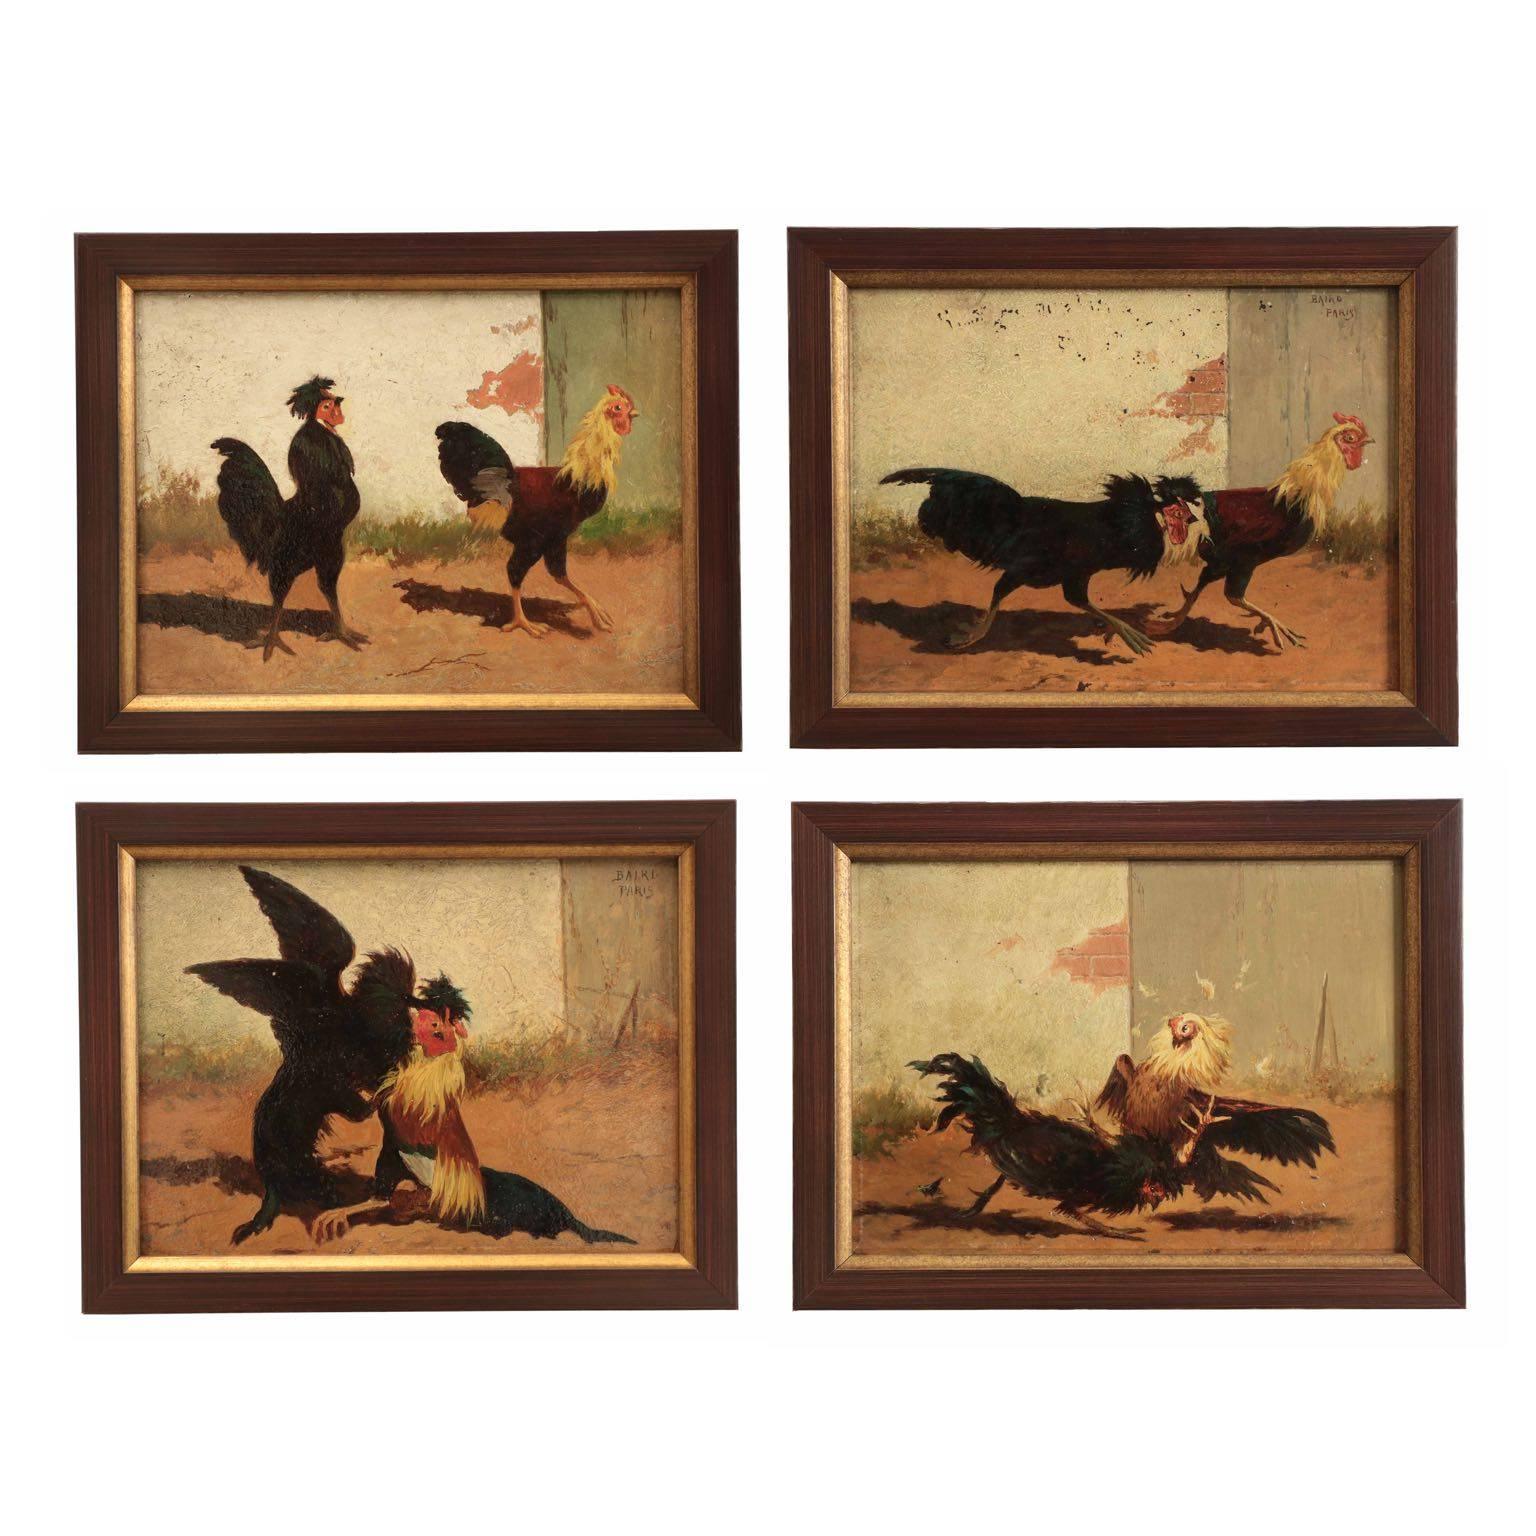 Four William Baird American, 1847-1899 Paintings of Cocks Fighting